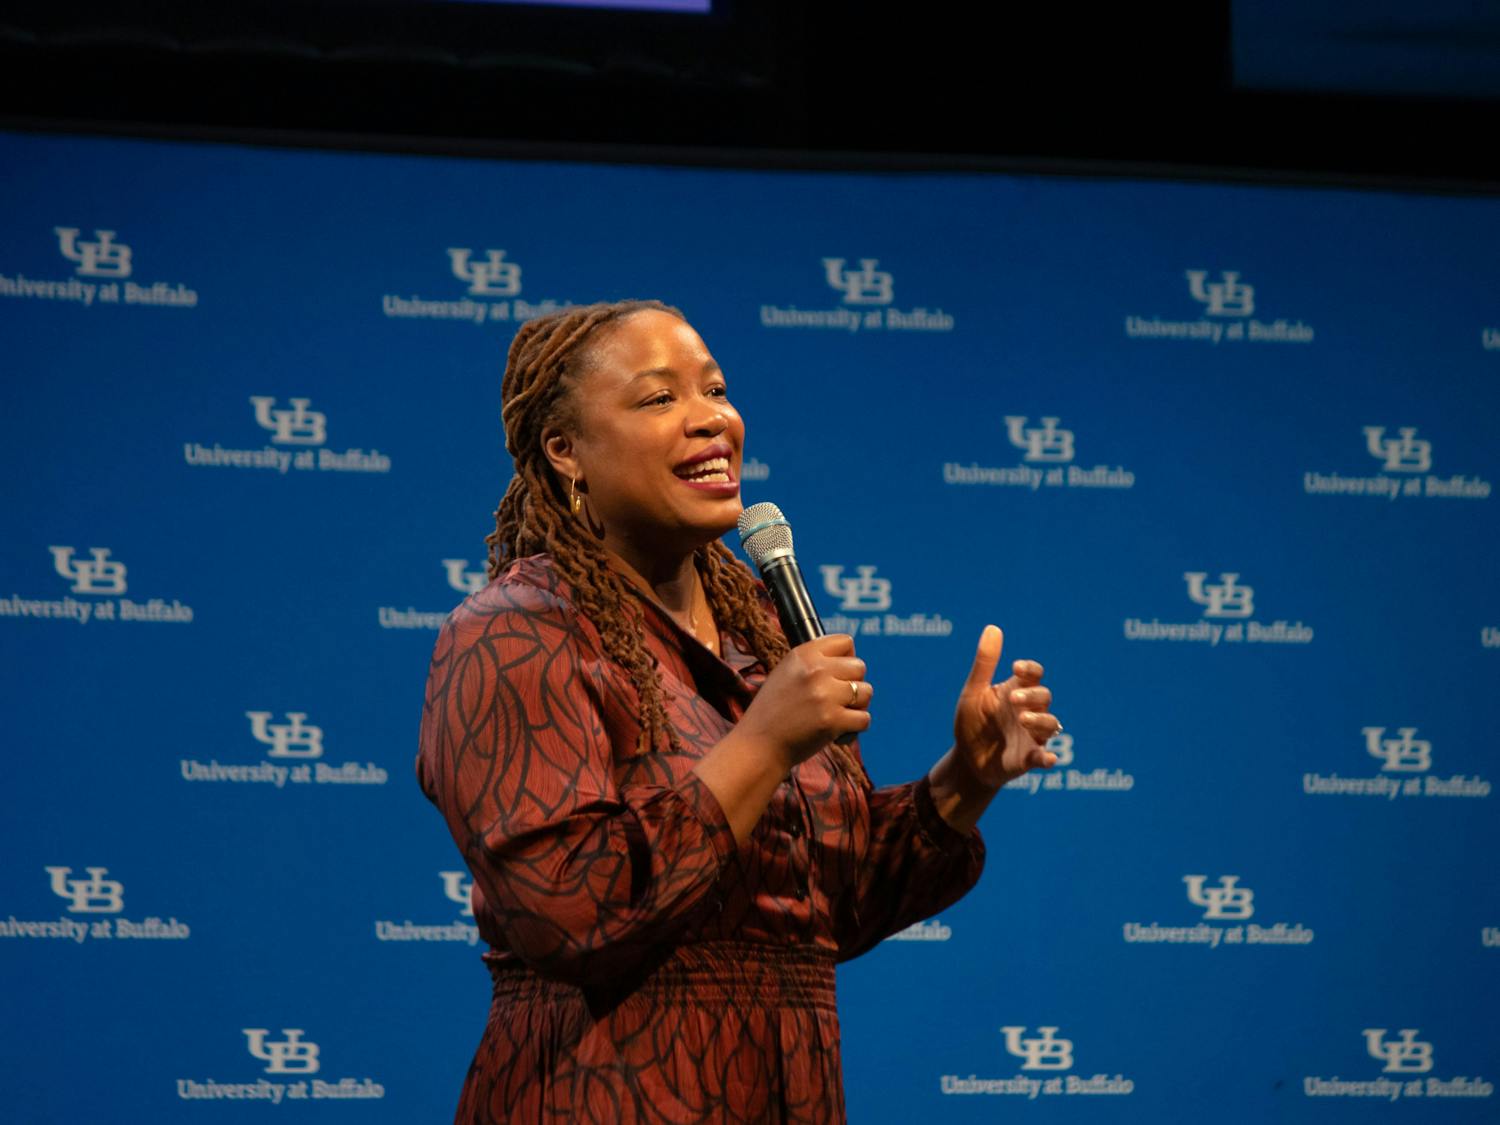 Heather McGhee's “The Sum of Us” records her journey across America to dive deep into the country’s racial and social inequalities.